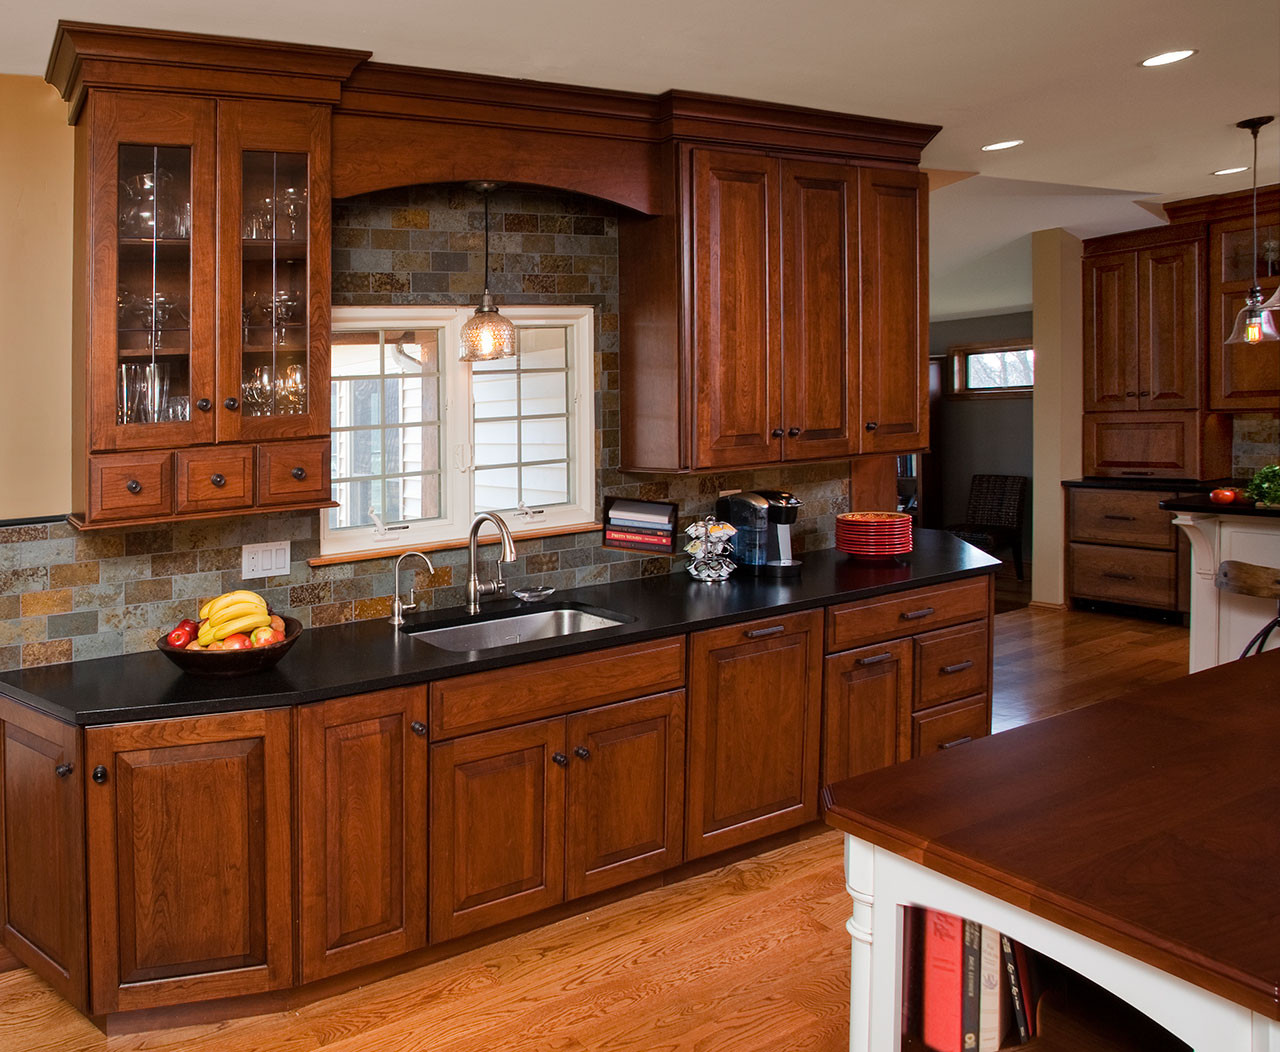 Kitchen Cabinets Remodel Ideas
 Traditional Kitchens Designs & Remodeling